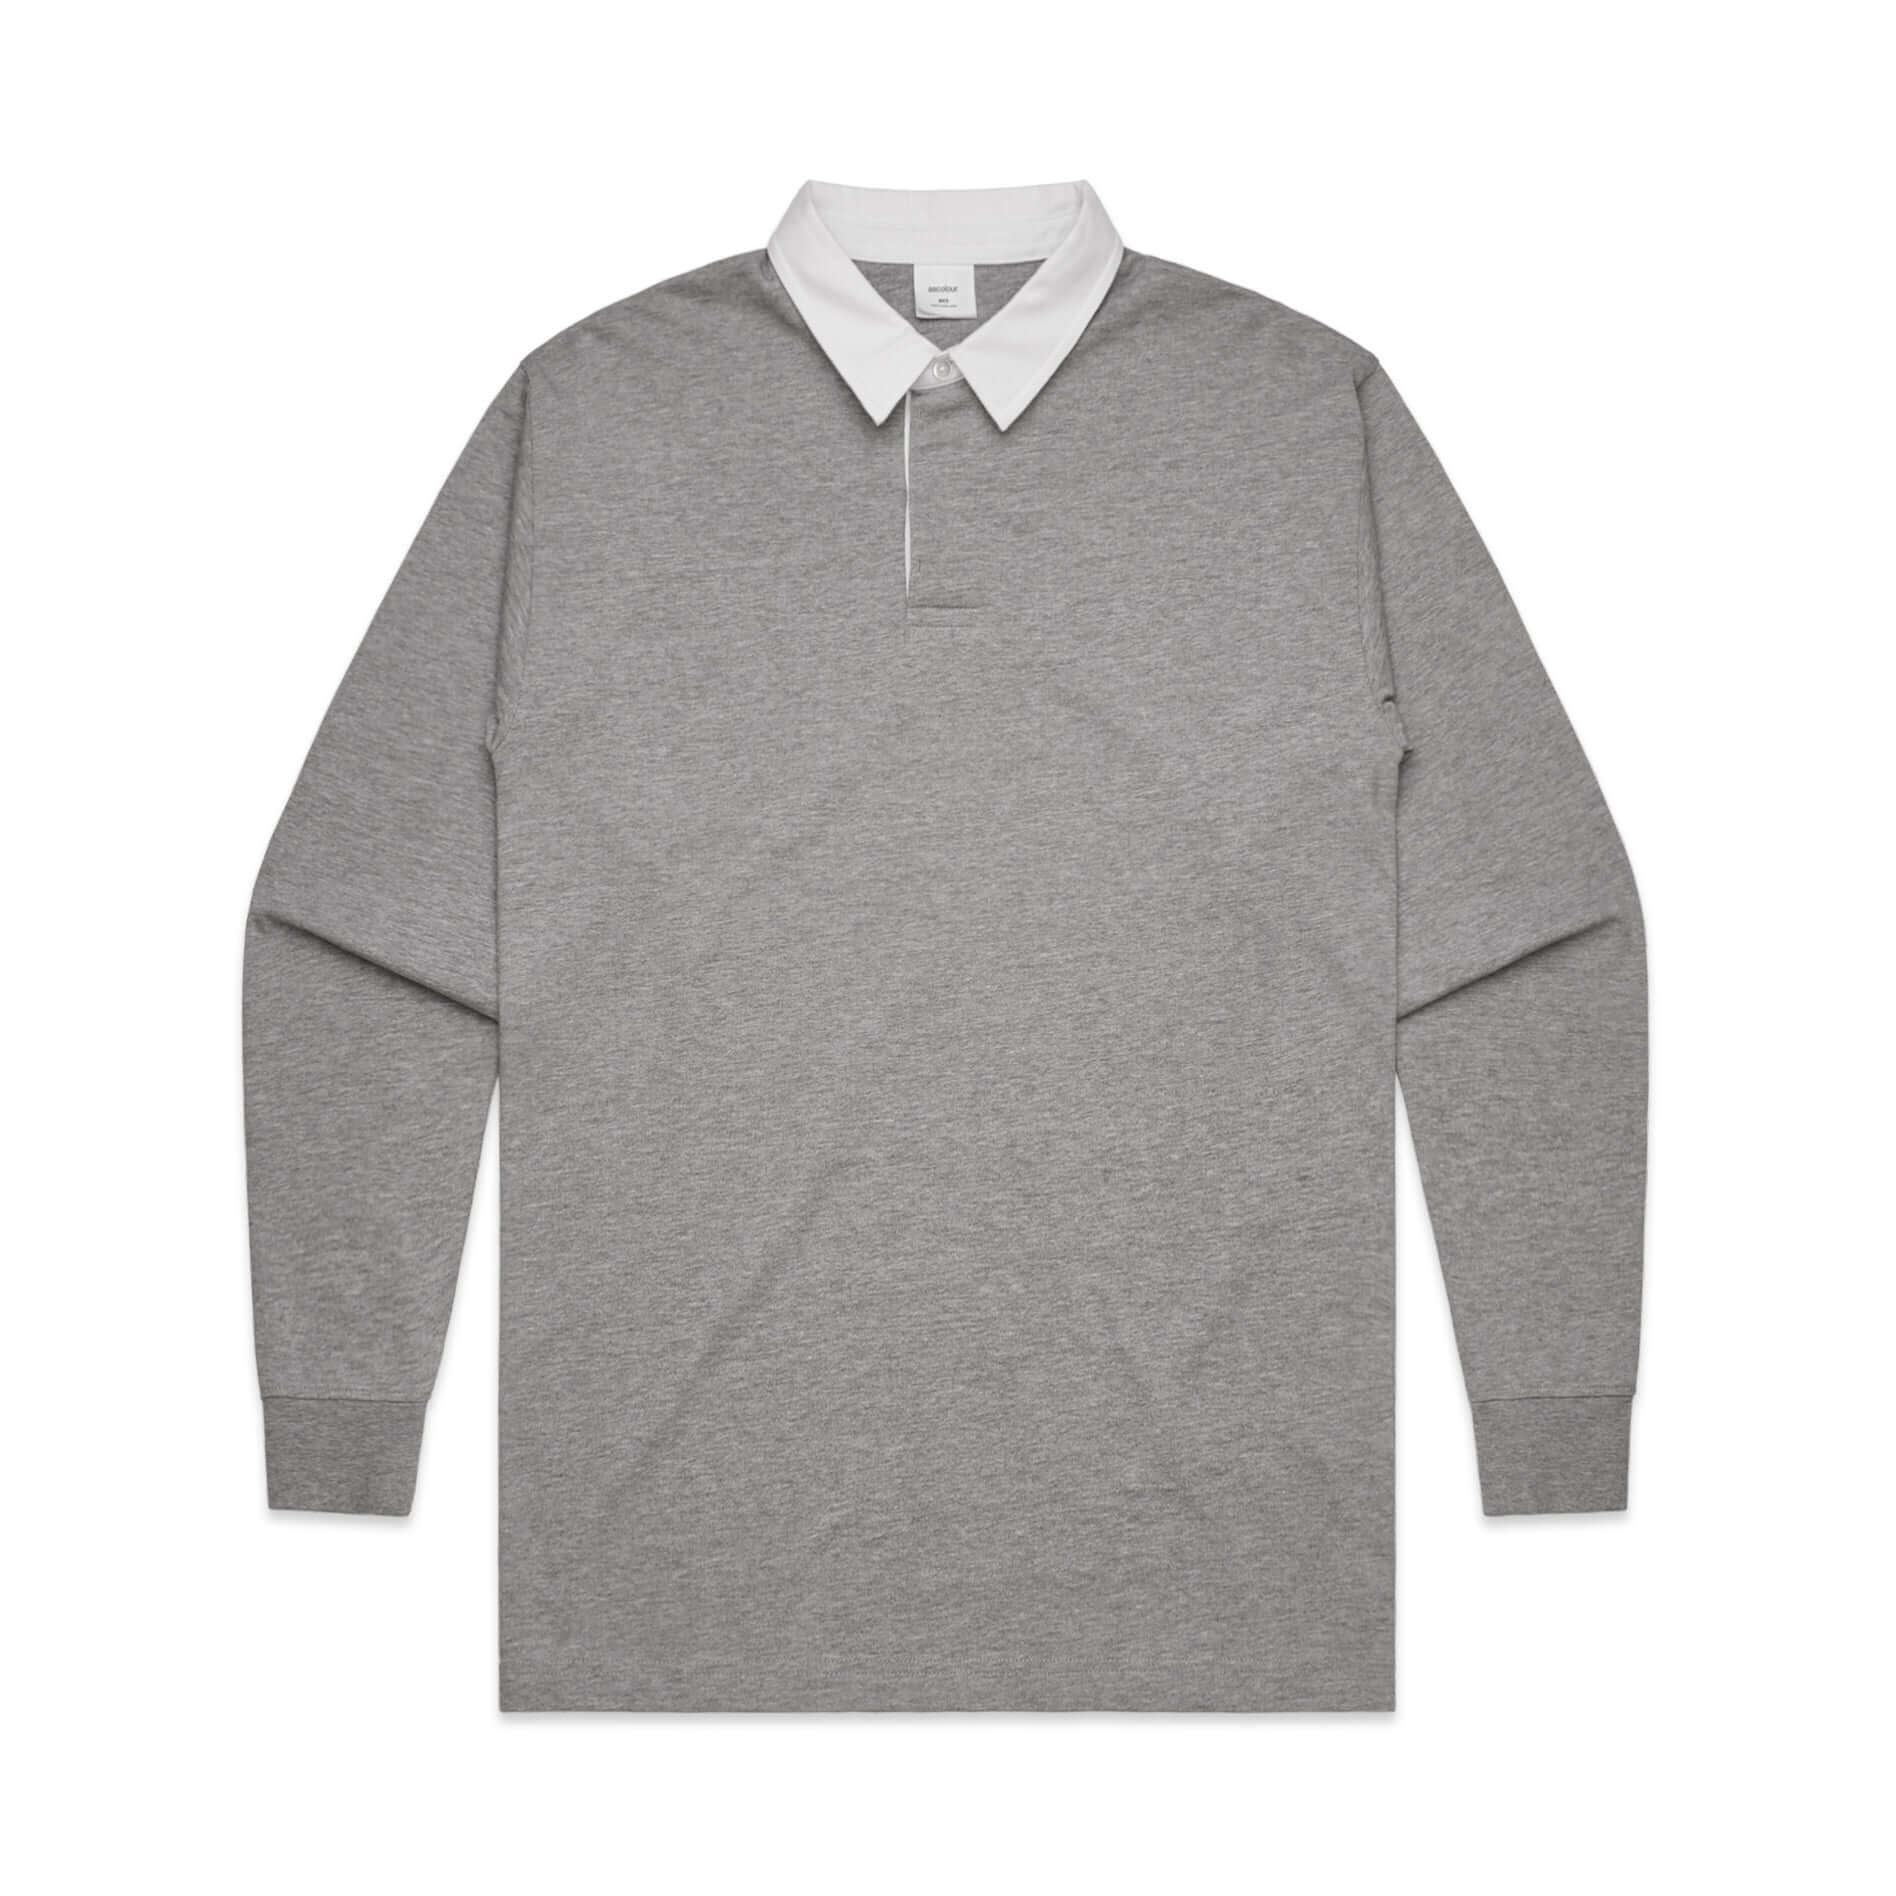 AS Colour RUGBY JERSEY - Grey Marle